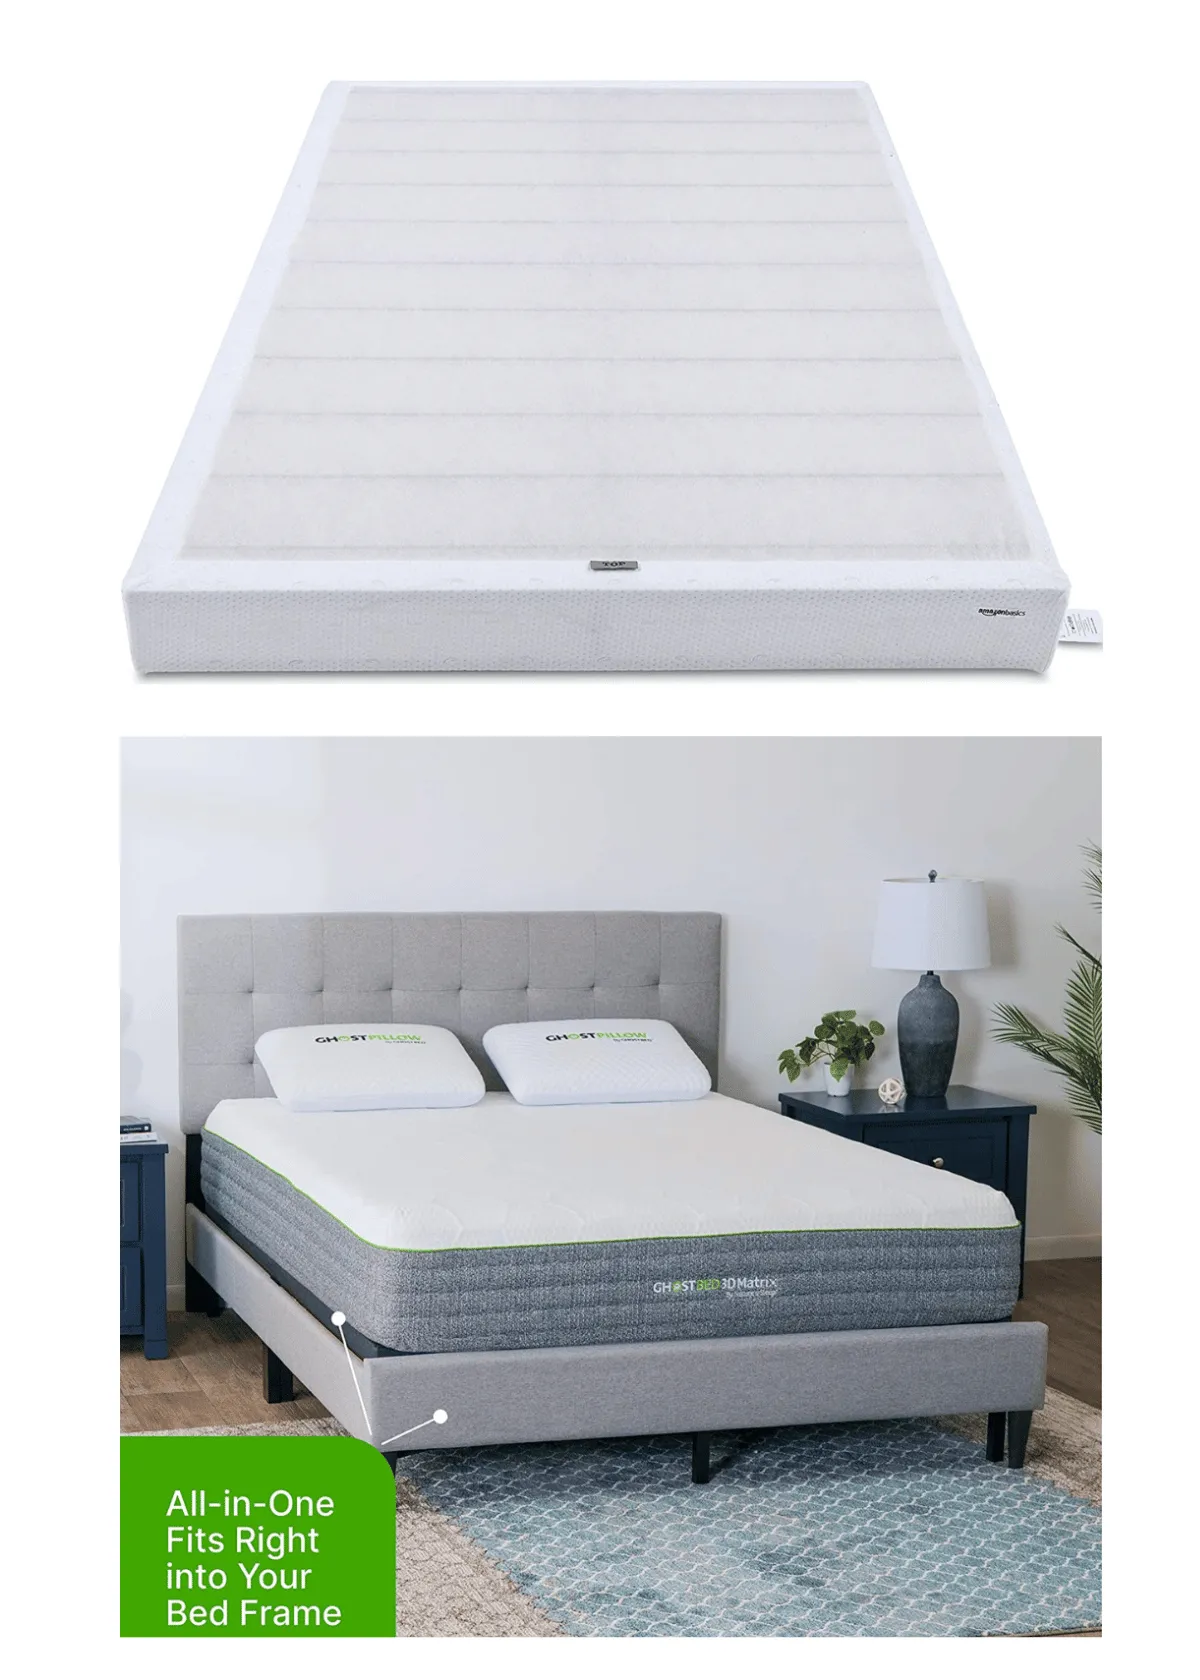 Box springs were once essential for mattresses. But are they necessary for your bed? (Credit: Amazon Basics; Casper)